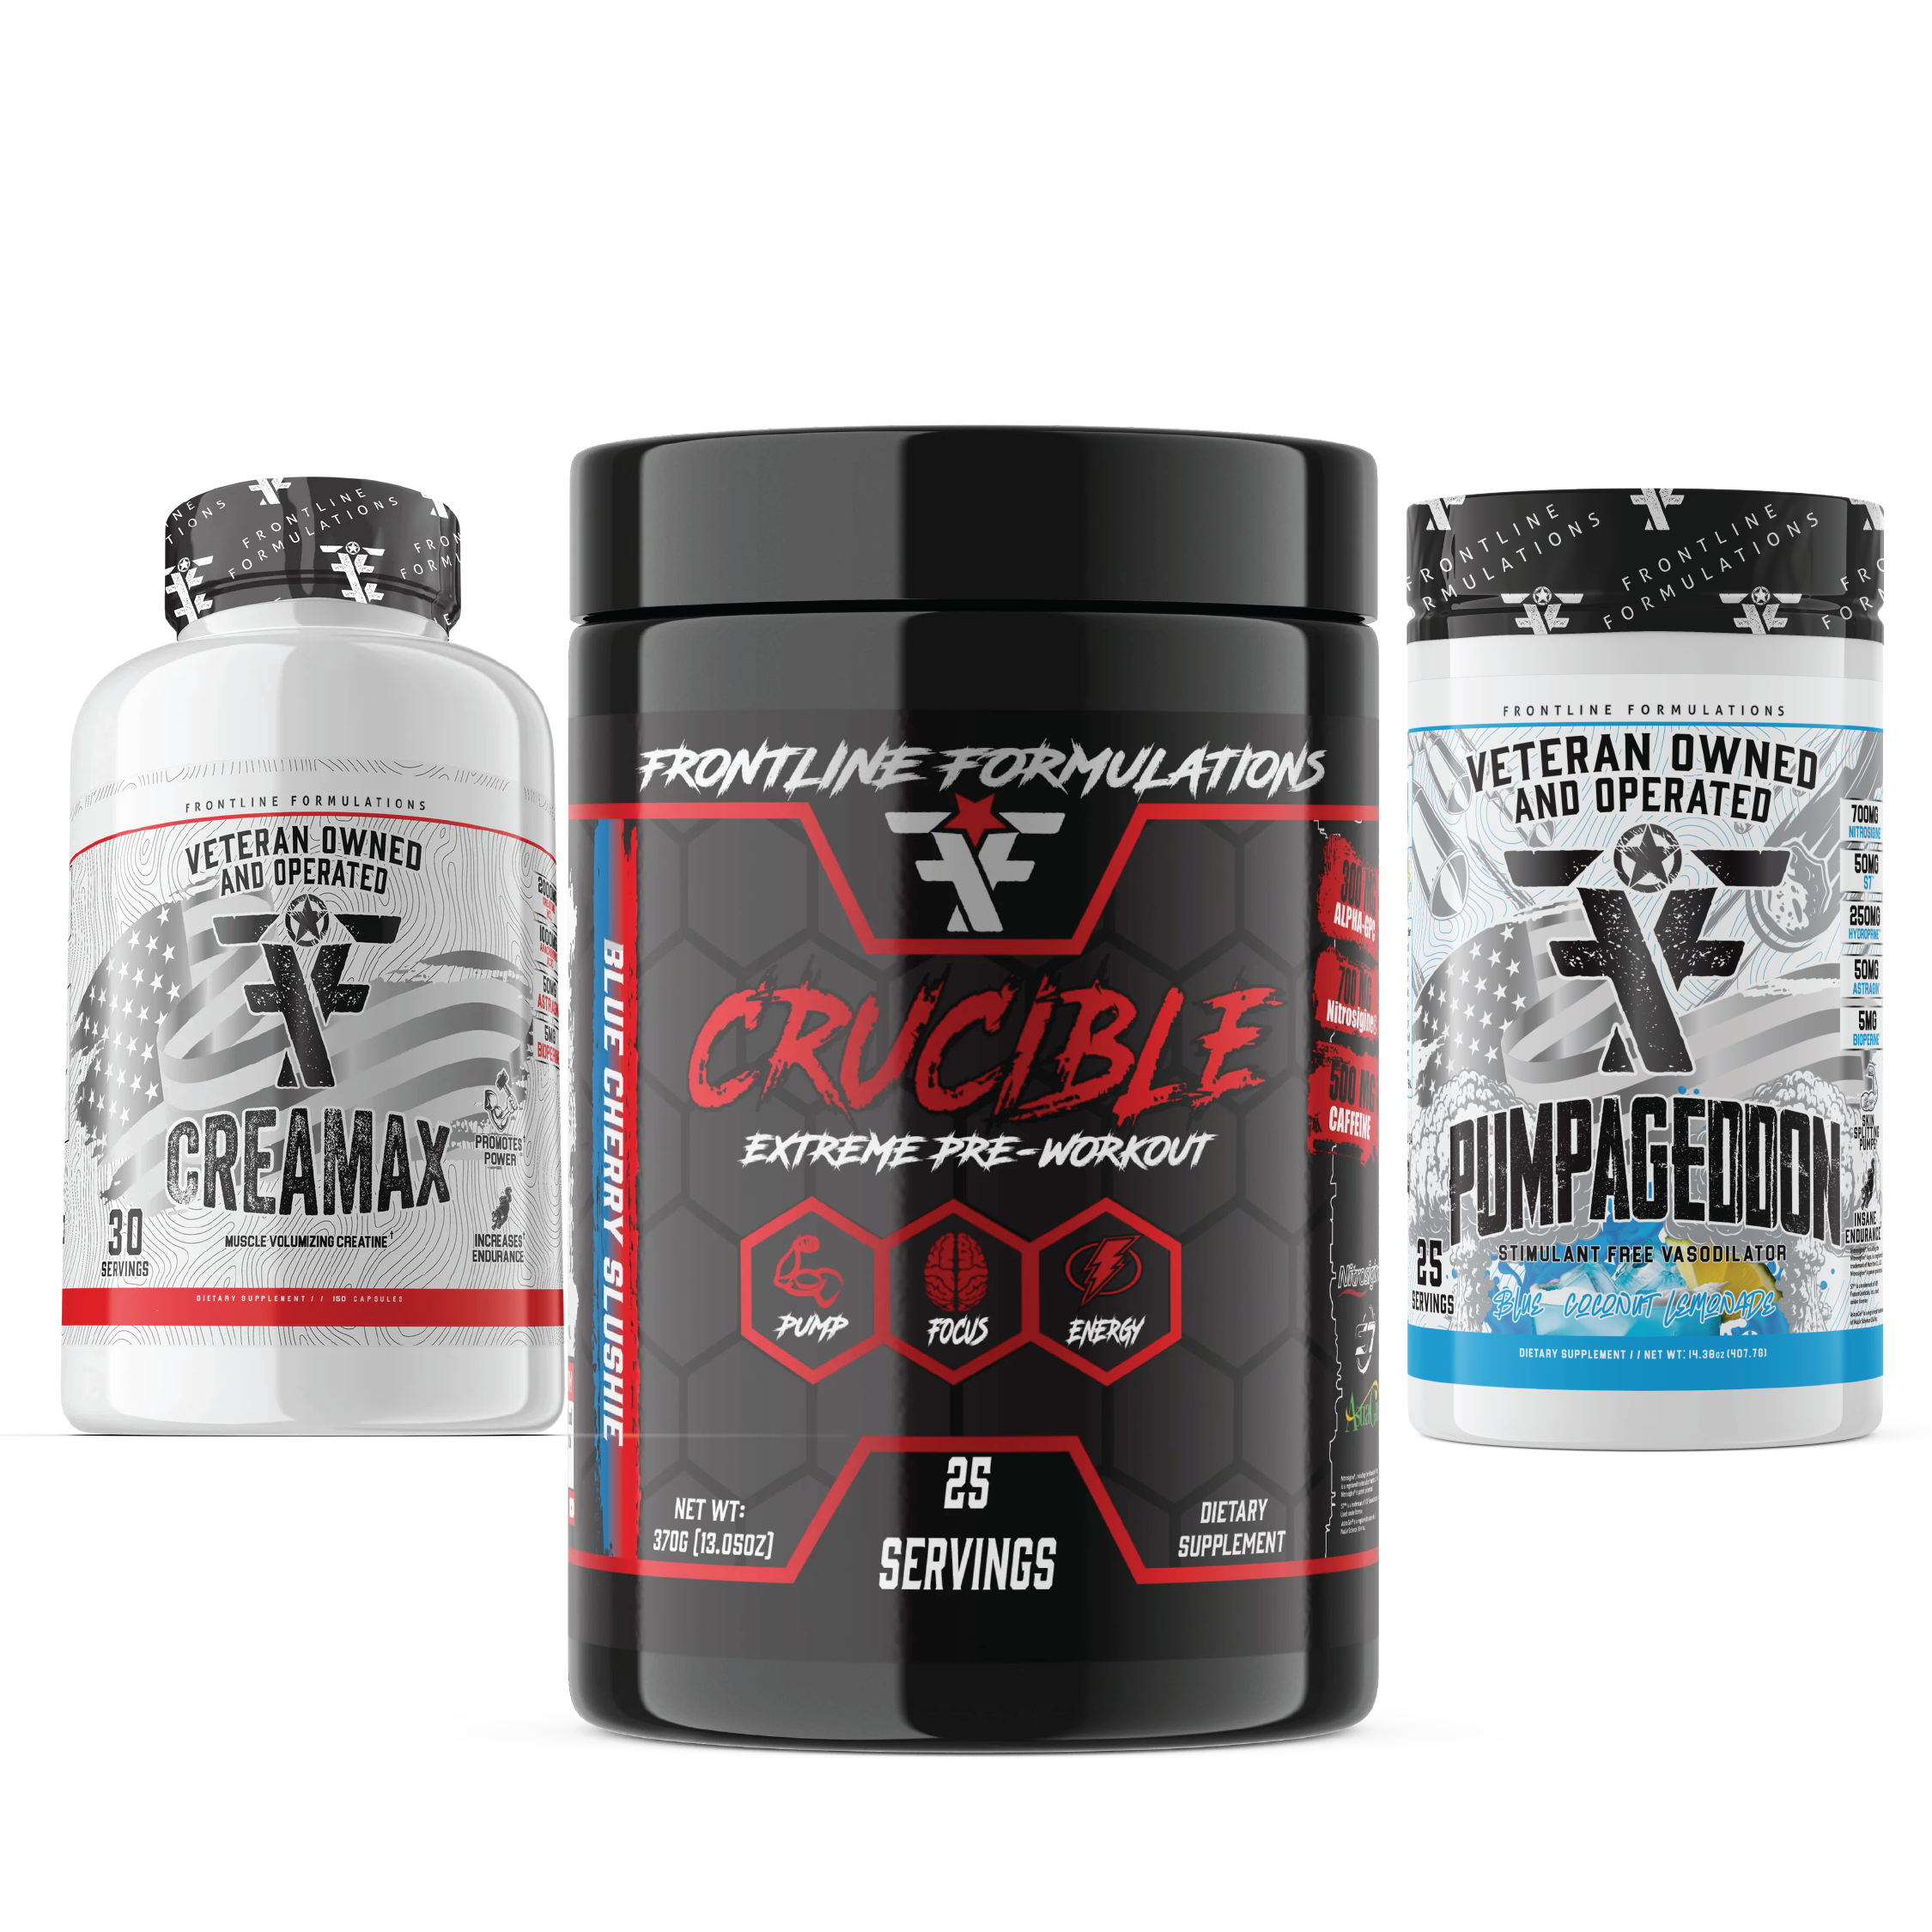 Crucible Pumpageddon Creamax Stack Crucible Crucible is quickly becoming the HOTTEST pre-workout on the market because of its clinically dosed ingredients and perfected formula. Insane energy from 500mg of potent time-released, tri-blend caffeine Enhances